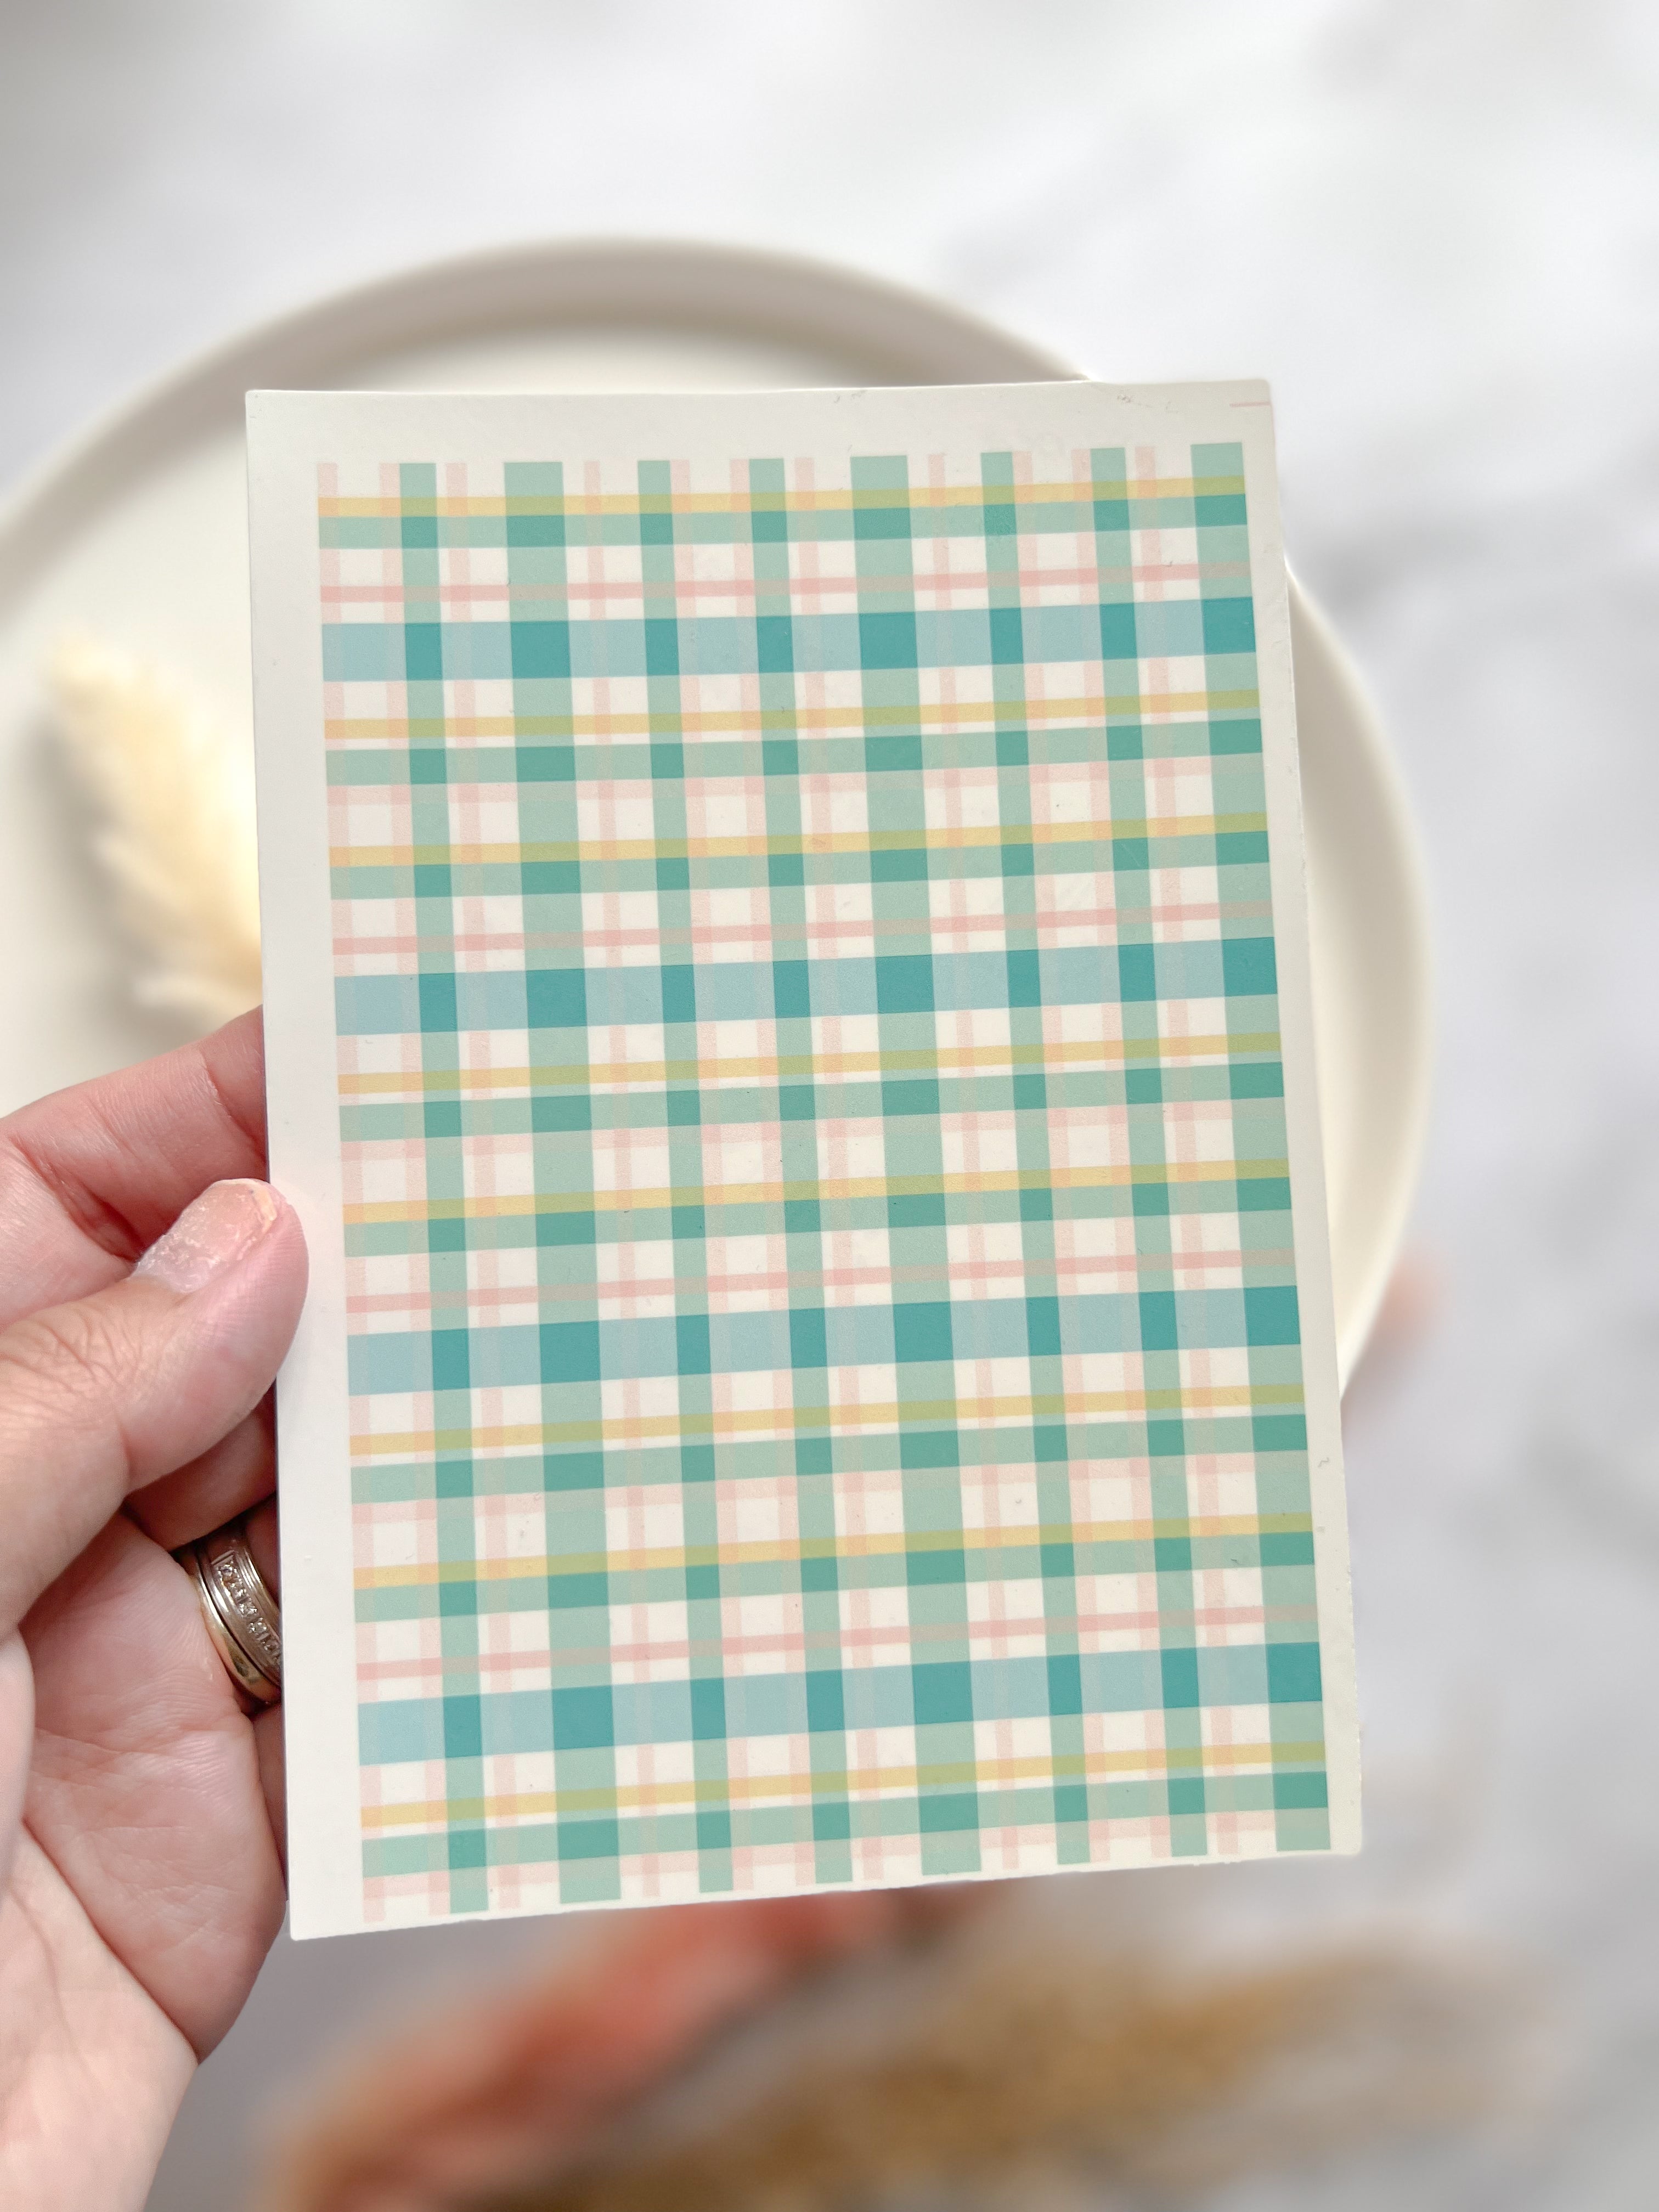 1 Sheet, Approx 13x90cm, Easter Plaid Print Water Decal Image Transfer for Polymer Clay / Ceramics